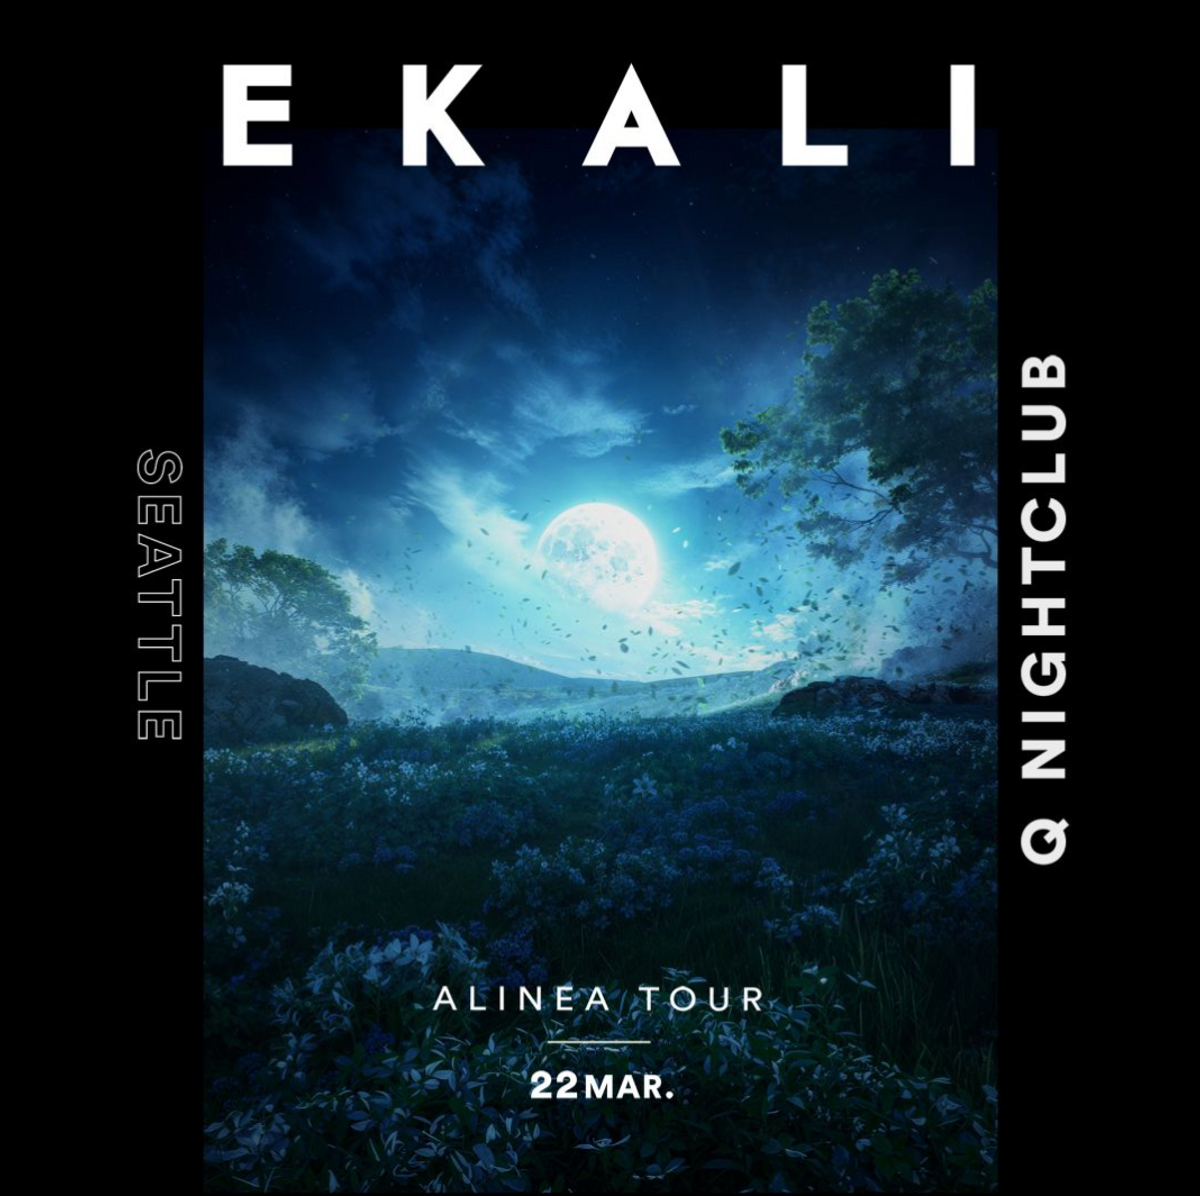 Poster for Ekali's show at Q Nightclub